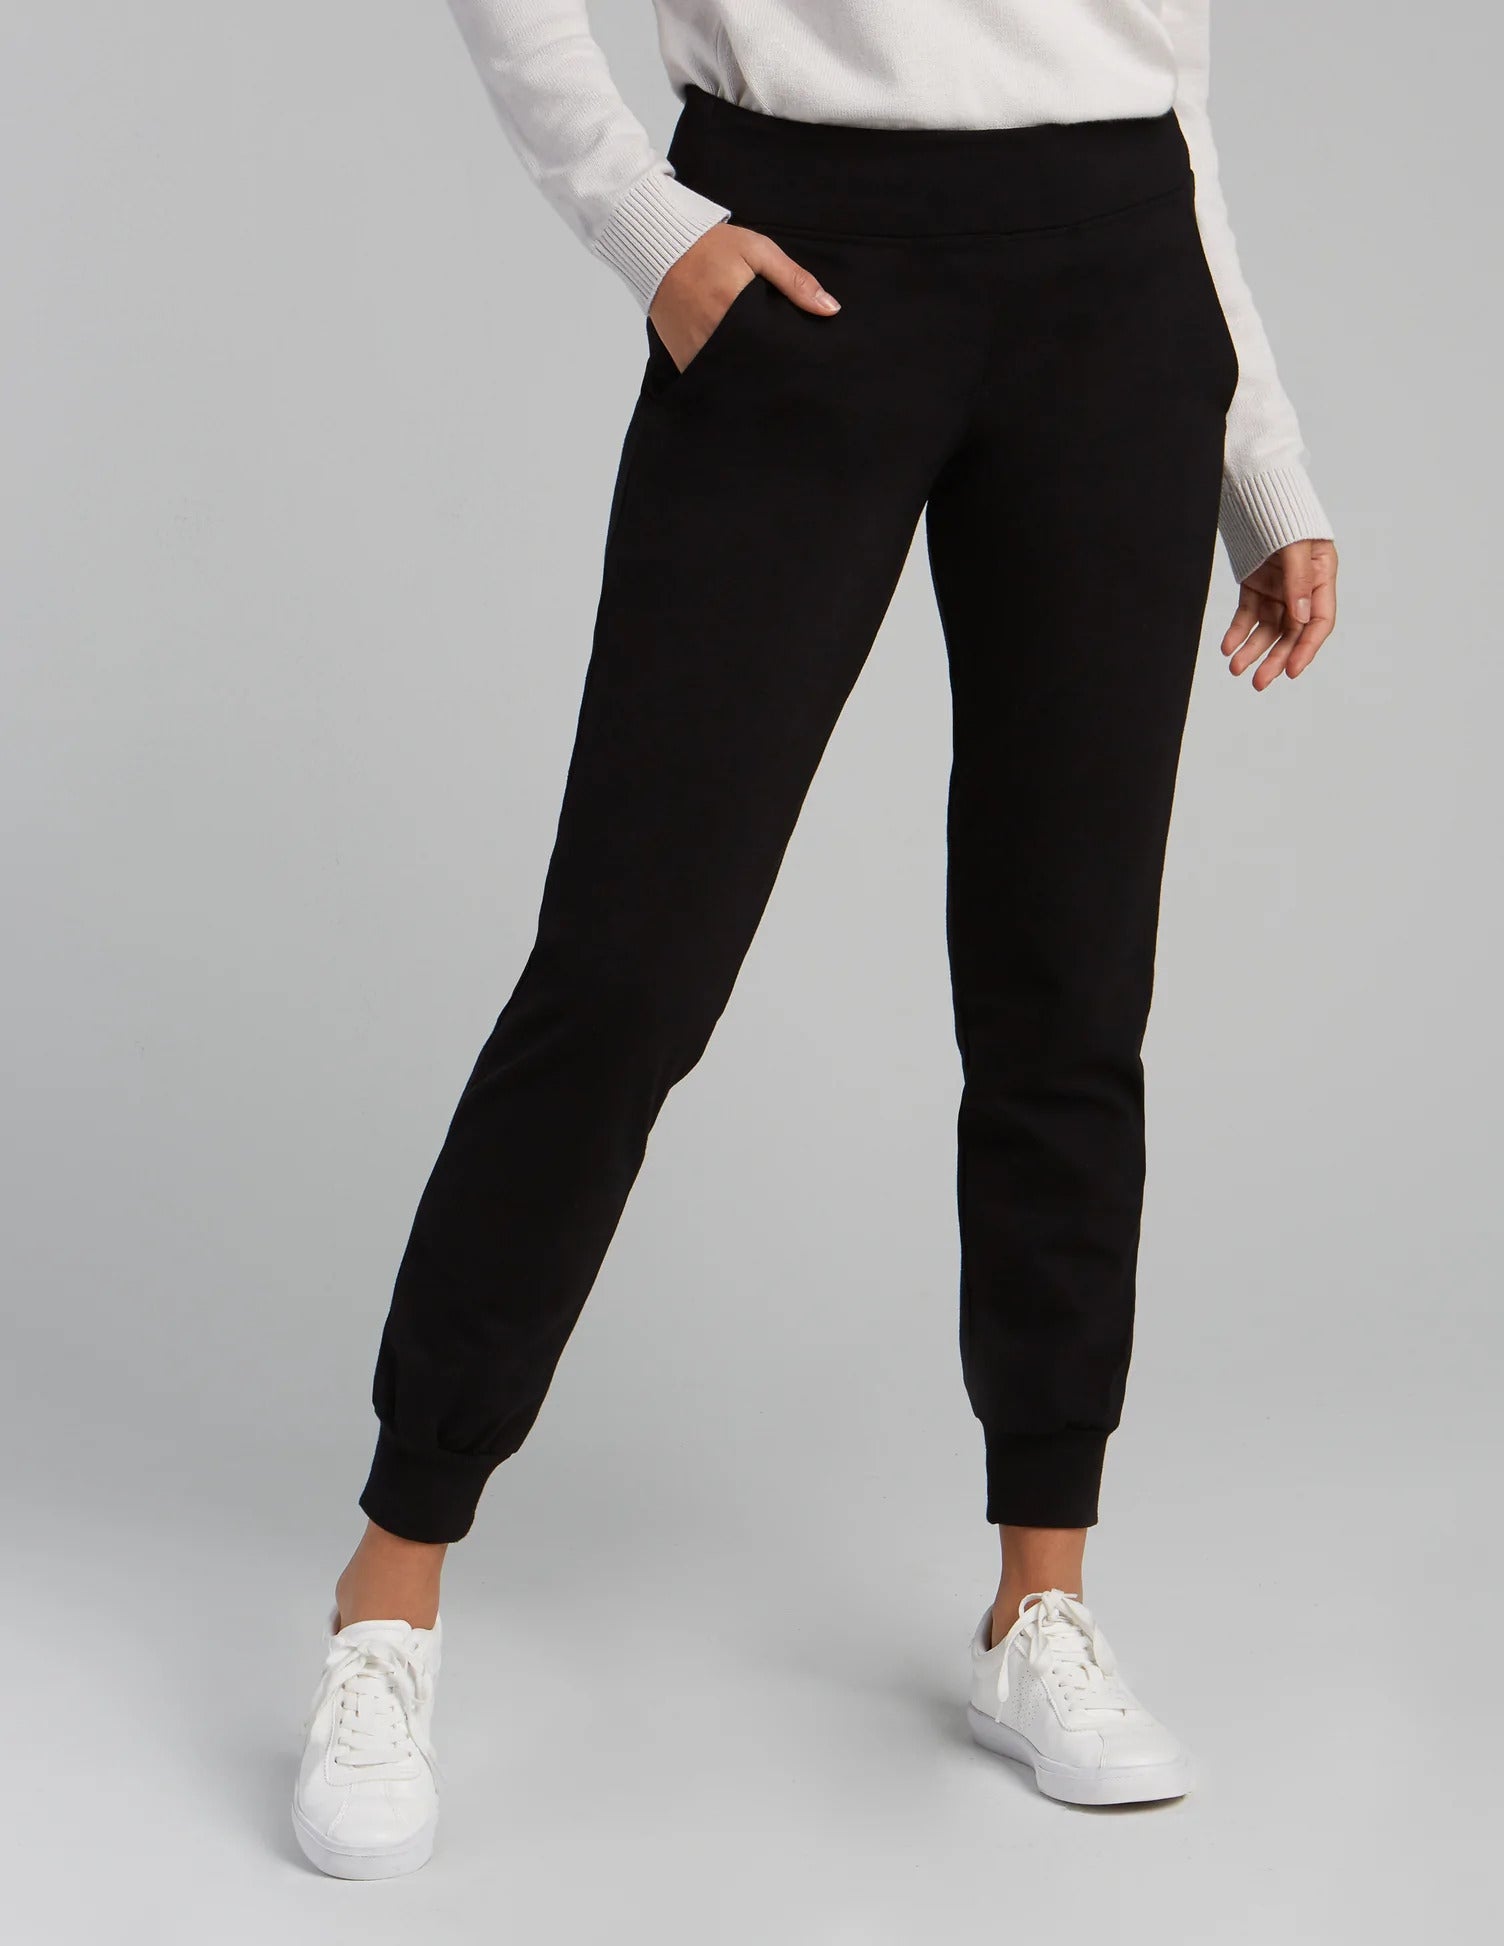 OTH Pants for Women